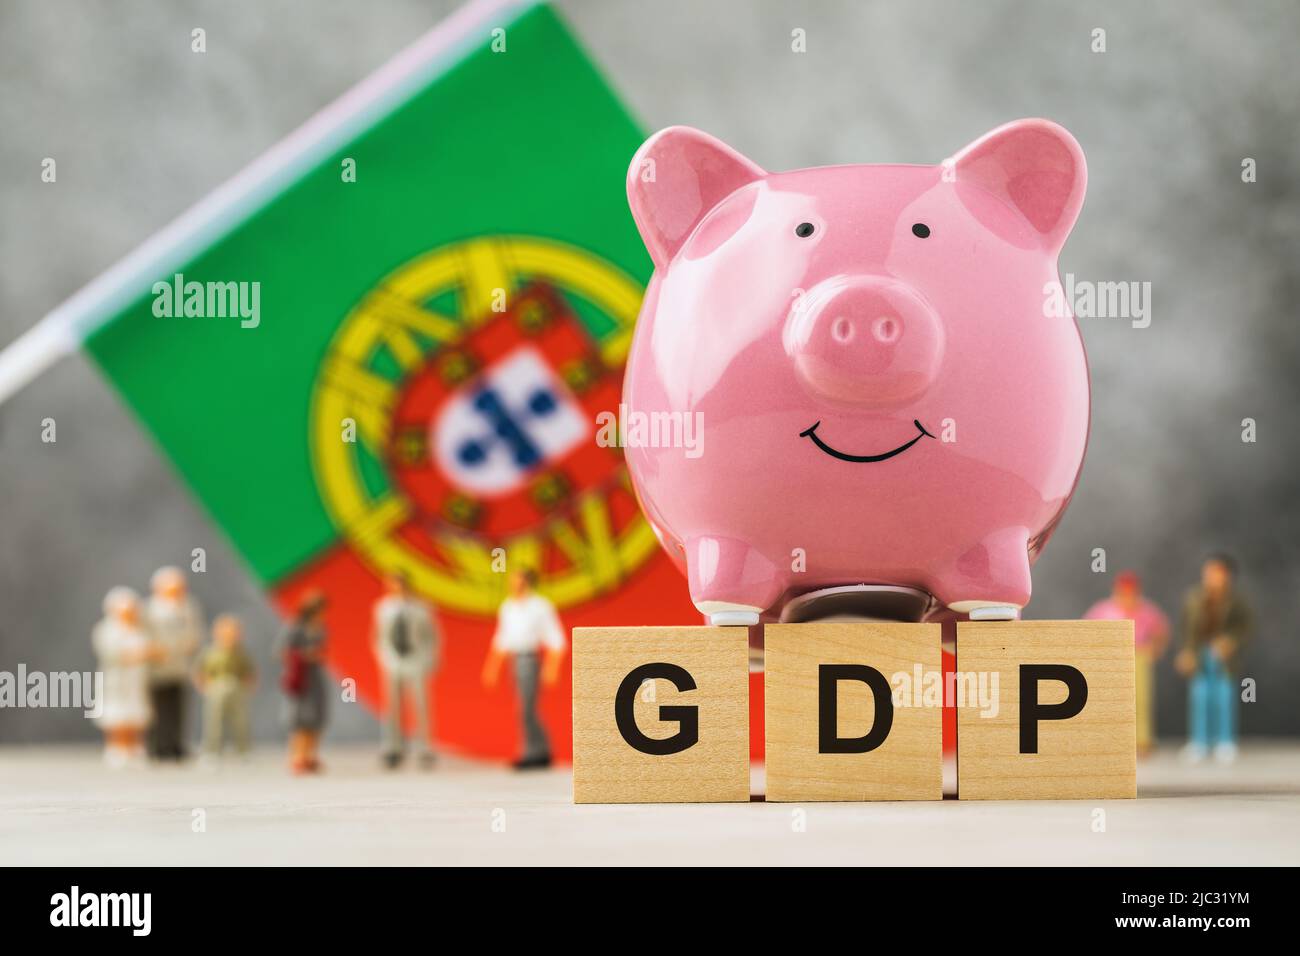 Piggy bank, wooden cubes with text, toy people made of plastic and a flag on an abstract background, a concept on the theme of Portugal GDP Stock Photo